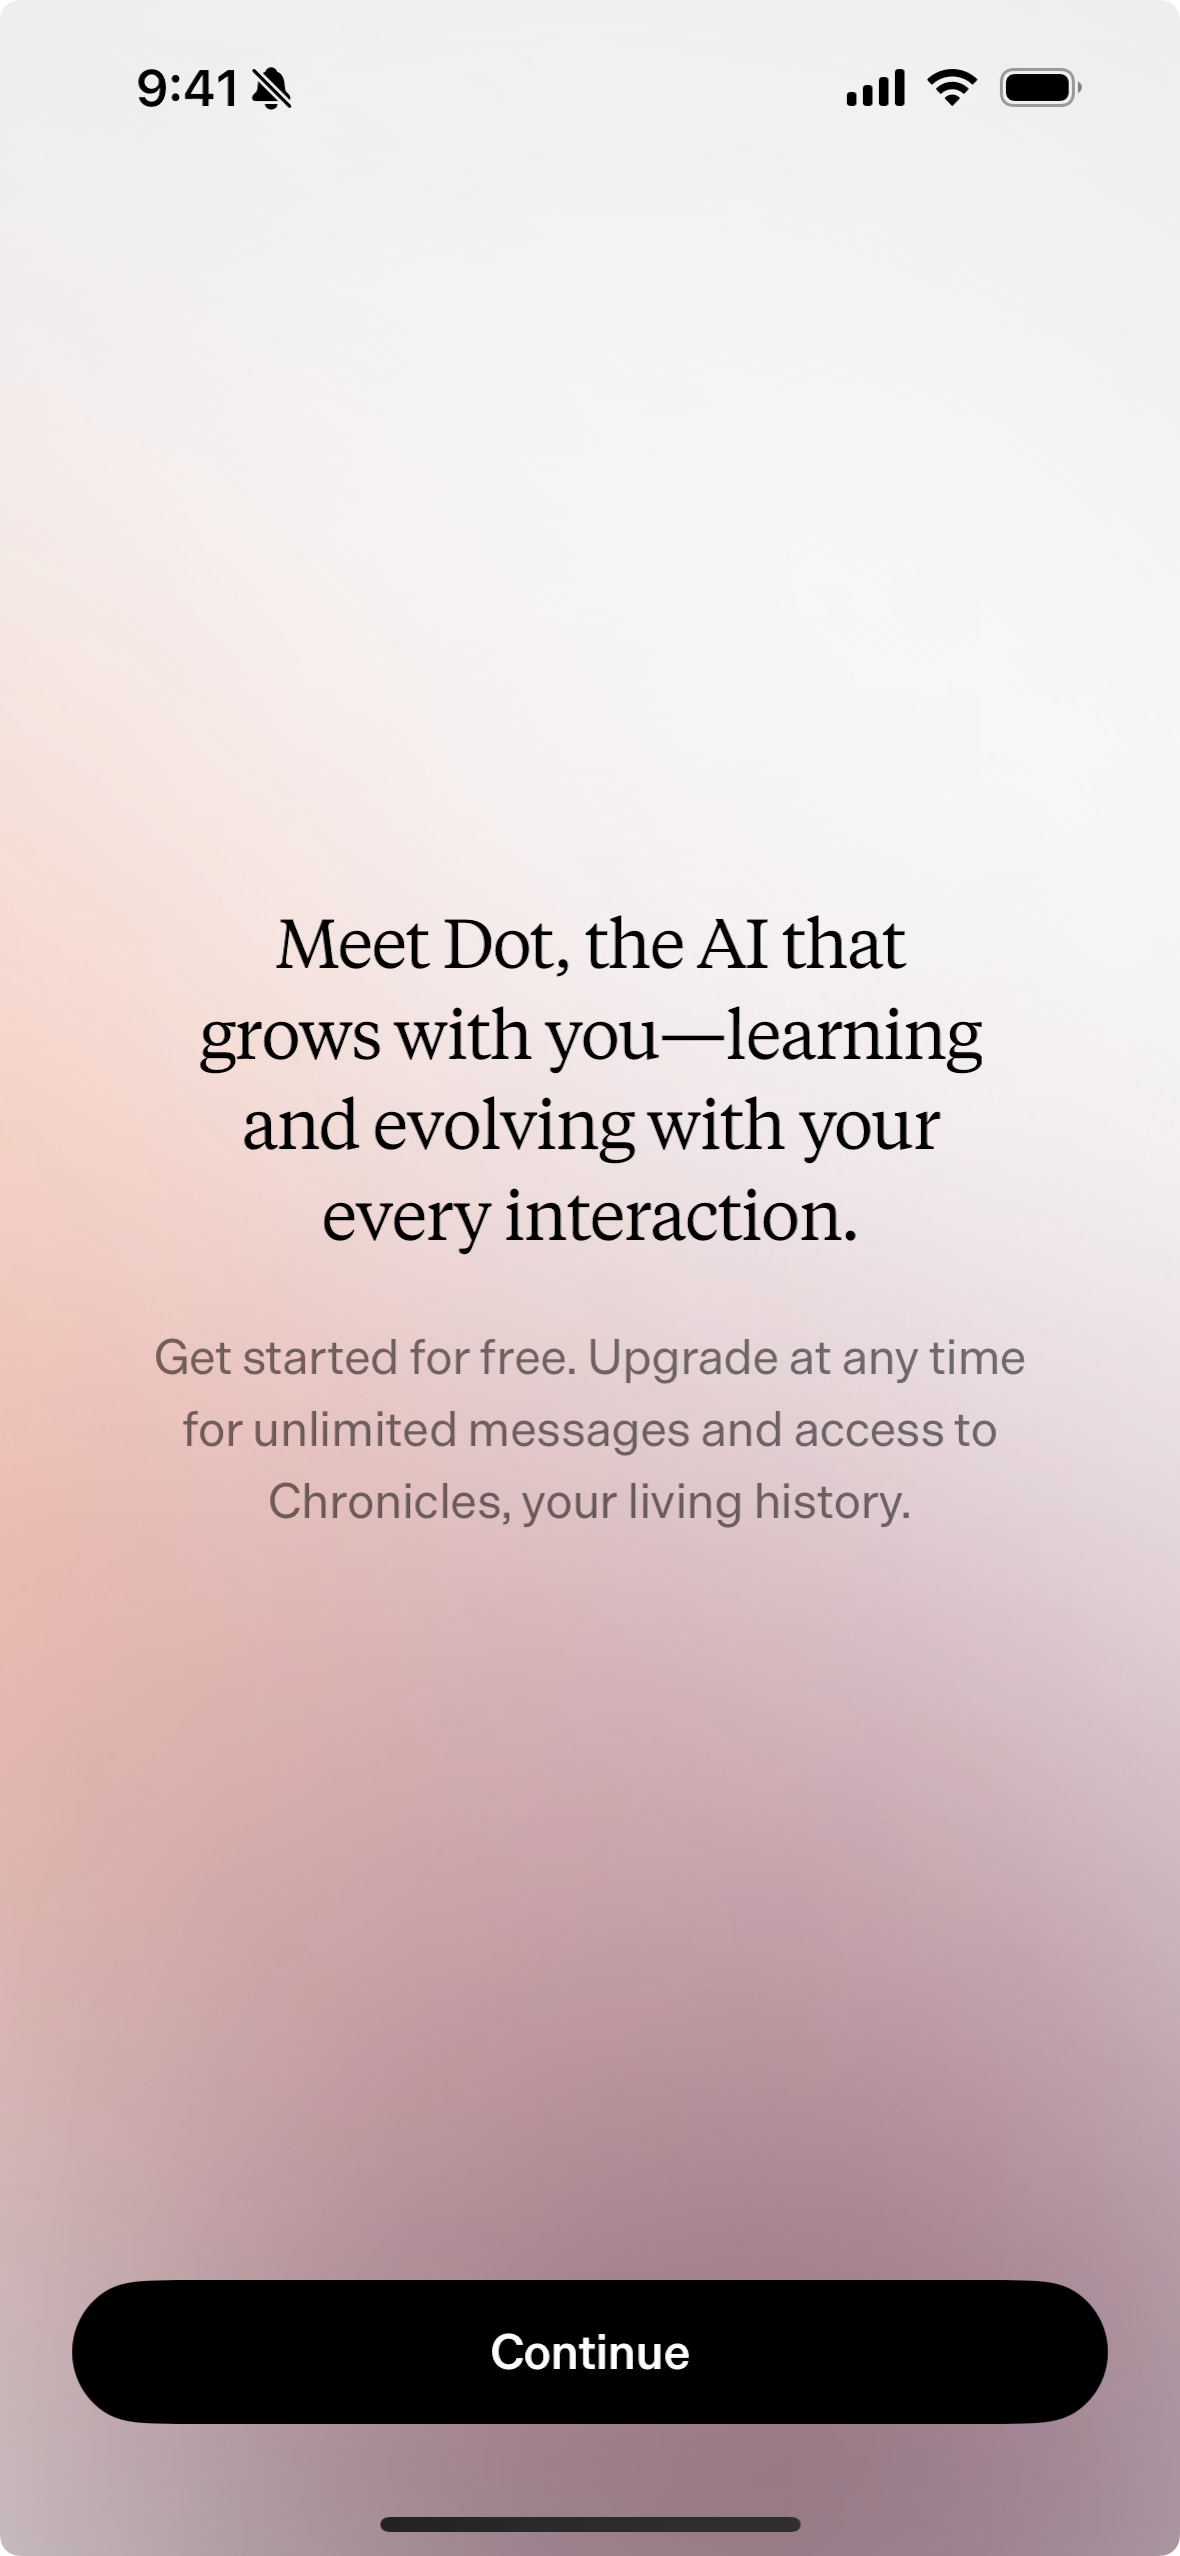 Meet Dot, the AI that grows with you